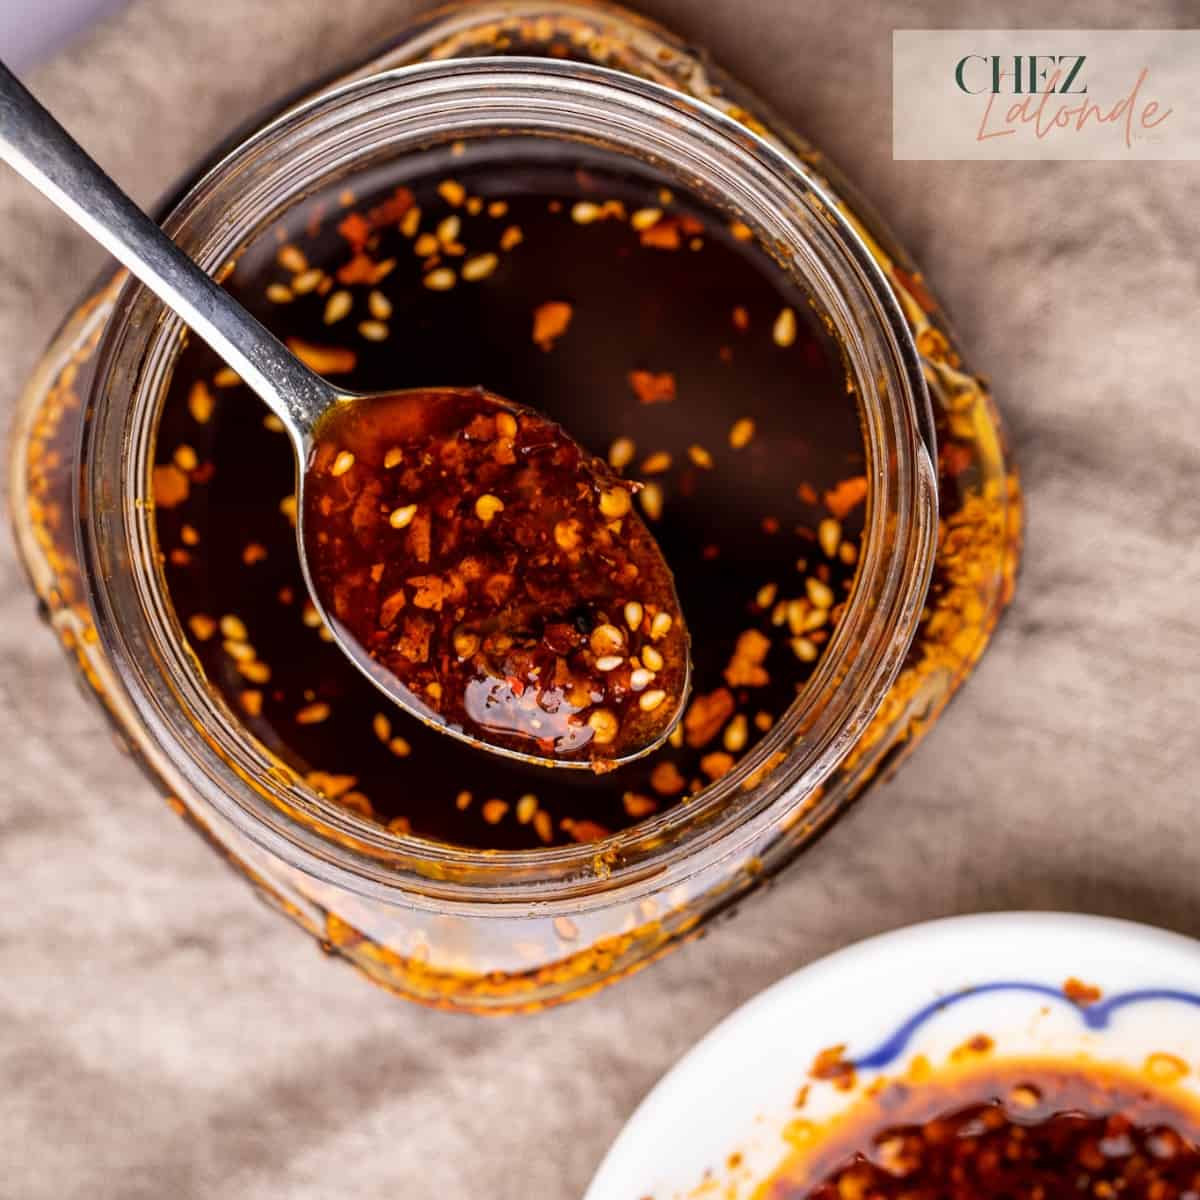 A spoon and a Mason jar full of Chinese chili Oil.